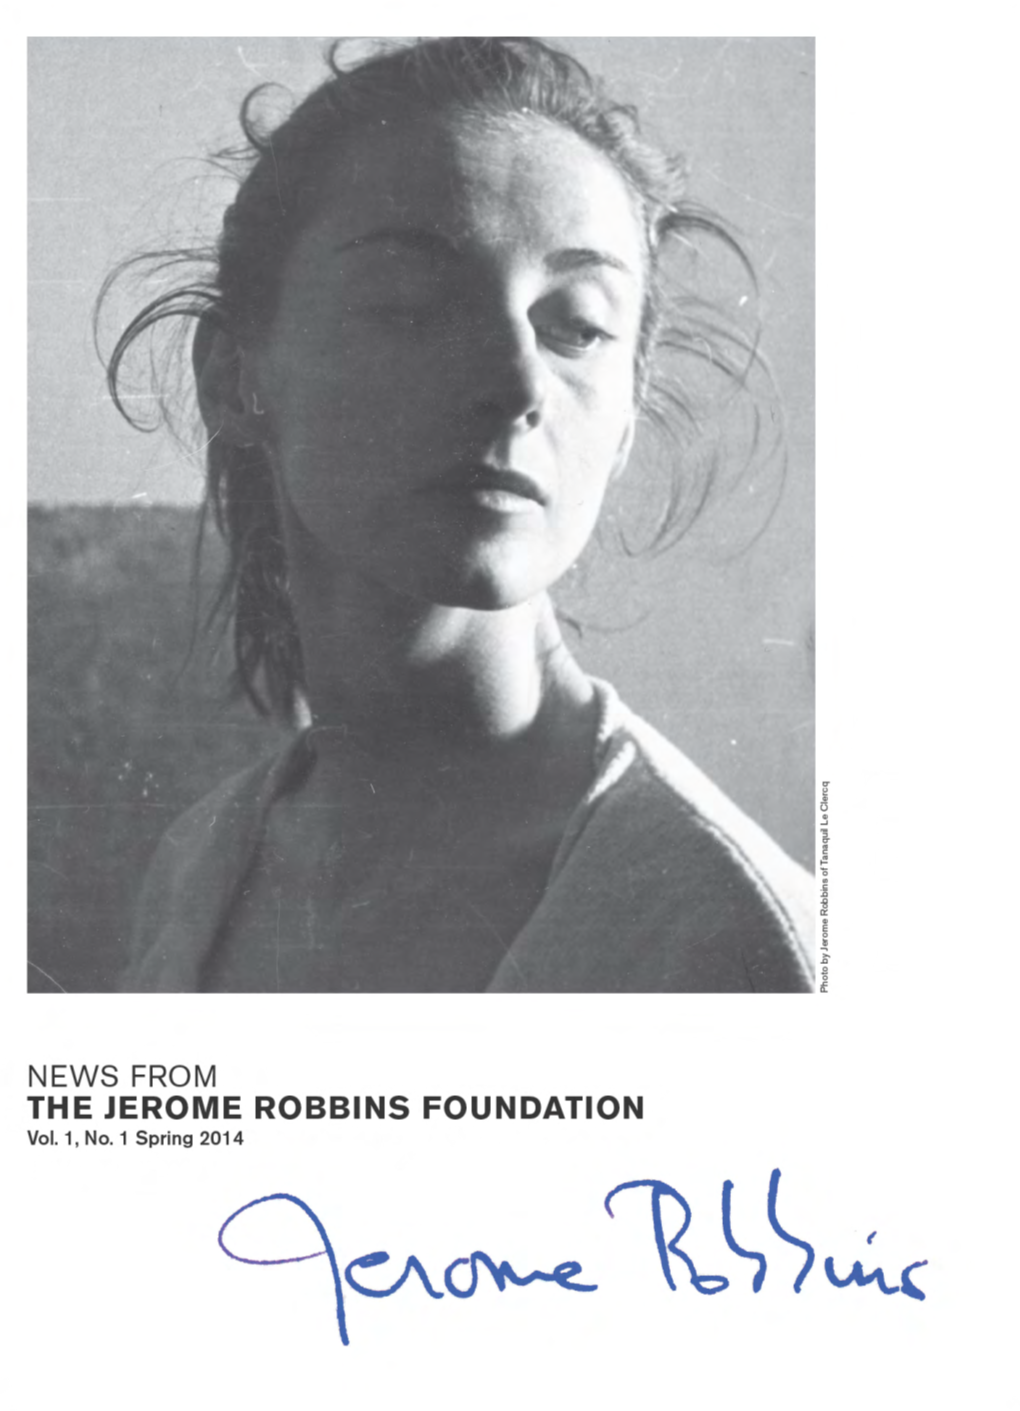 News from the Jerome Robbins Foundation Vol. 1, NO. 1